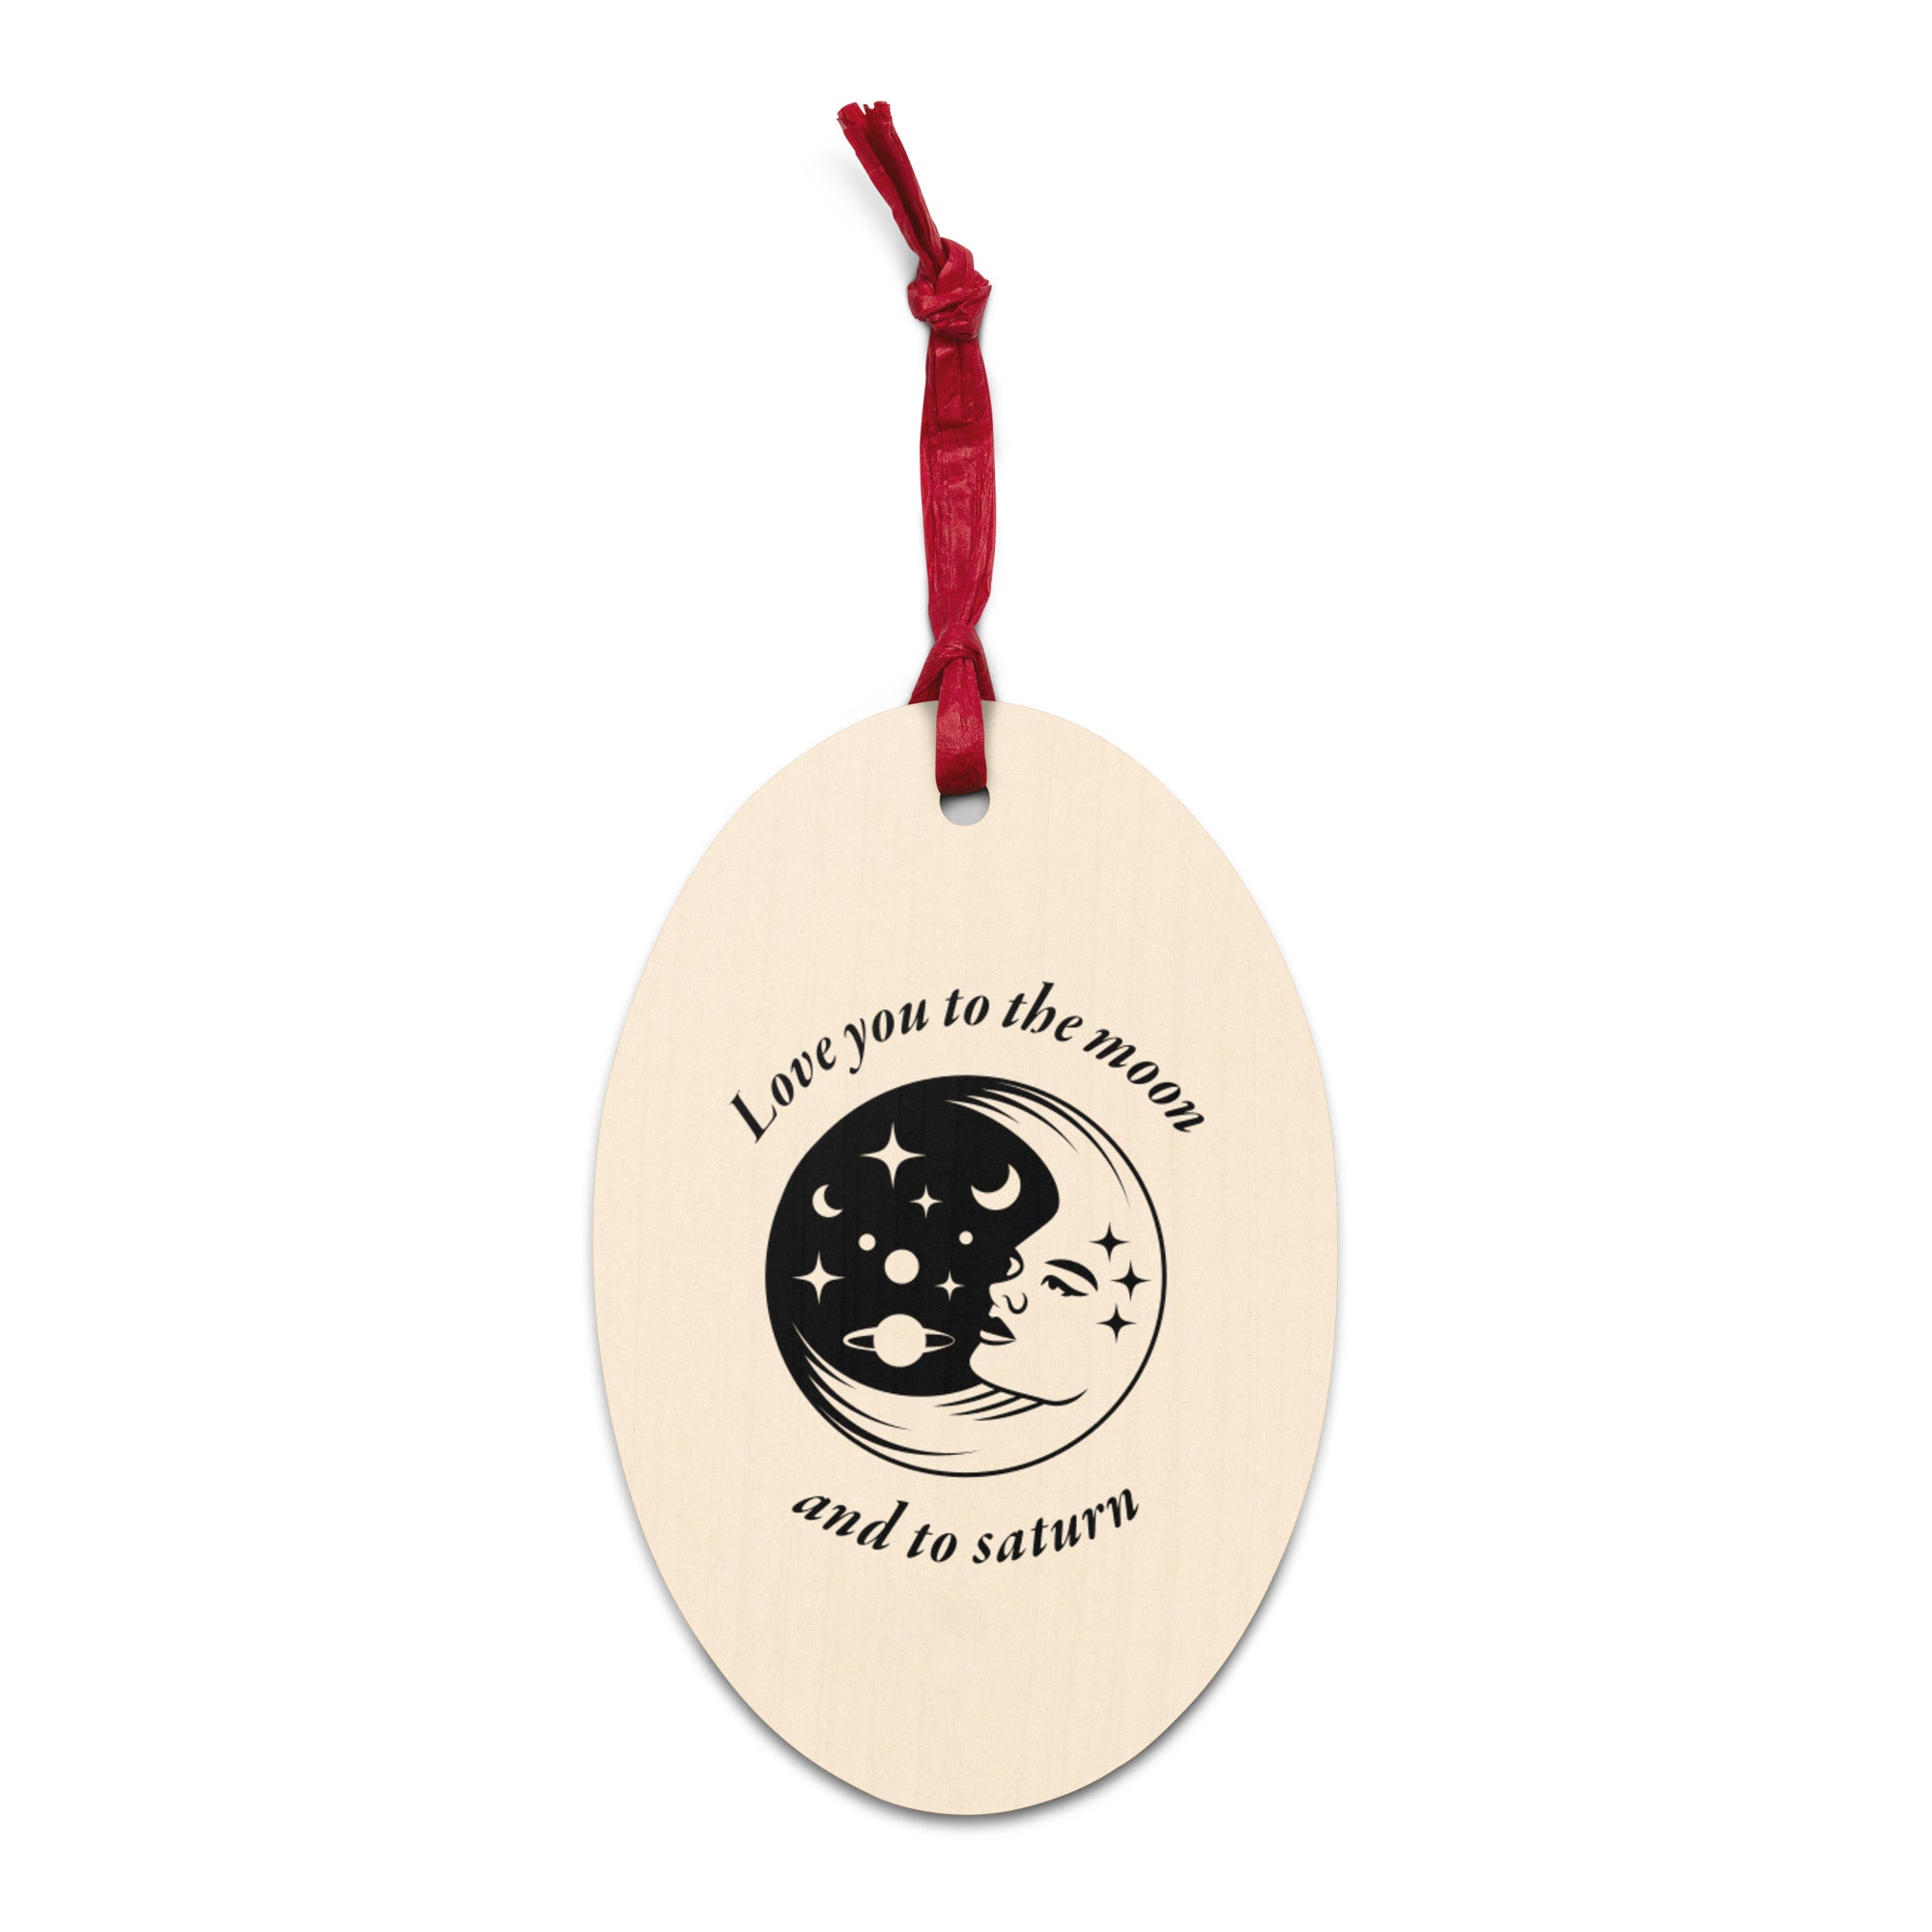 Love You To The Moon And Saturn - Swift Lyric Printed Vintage Style Wooden Christmas Tree Holiday ornaments